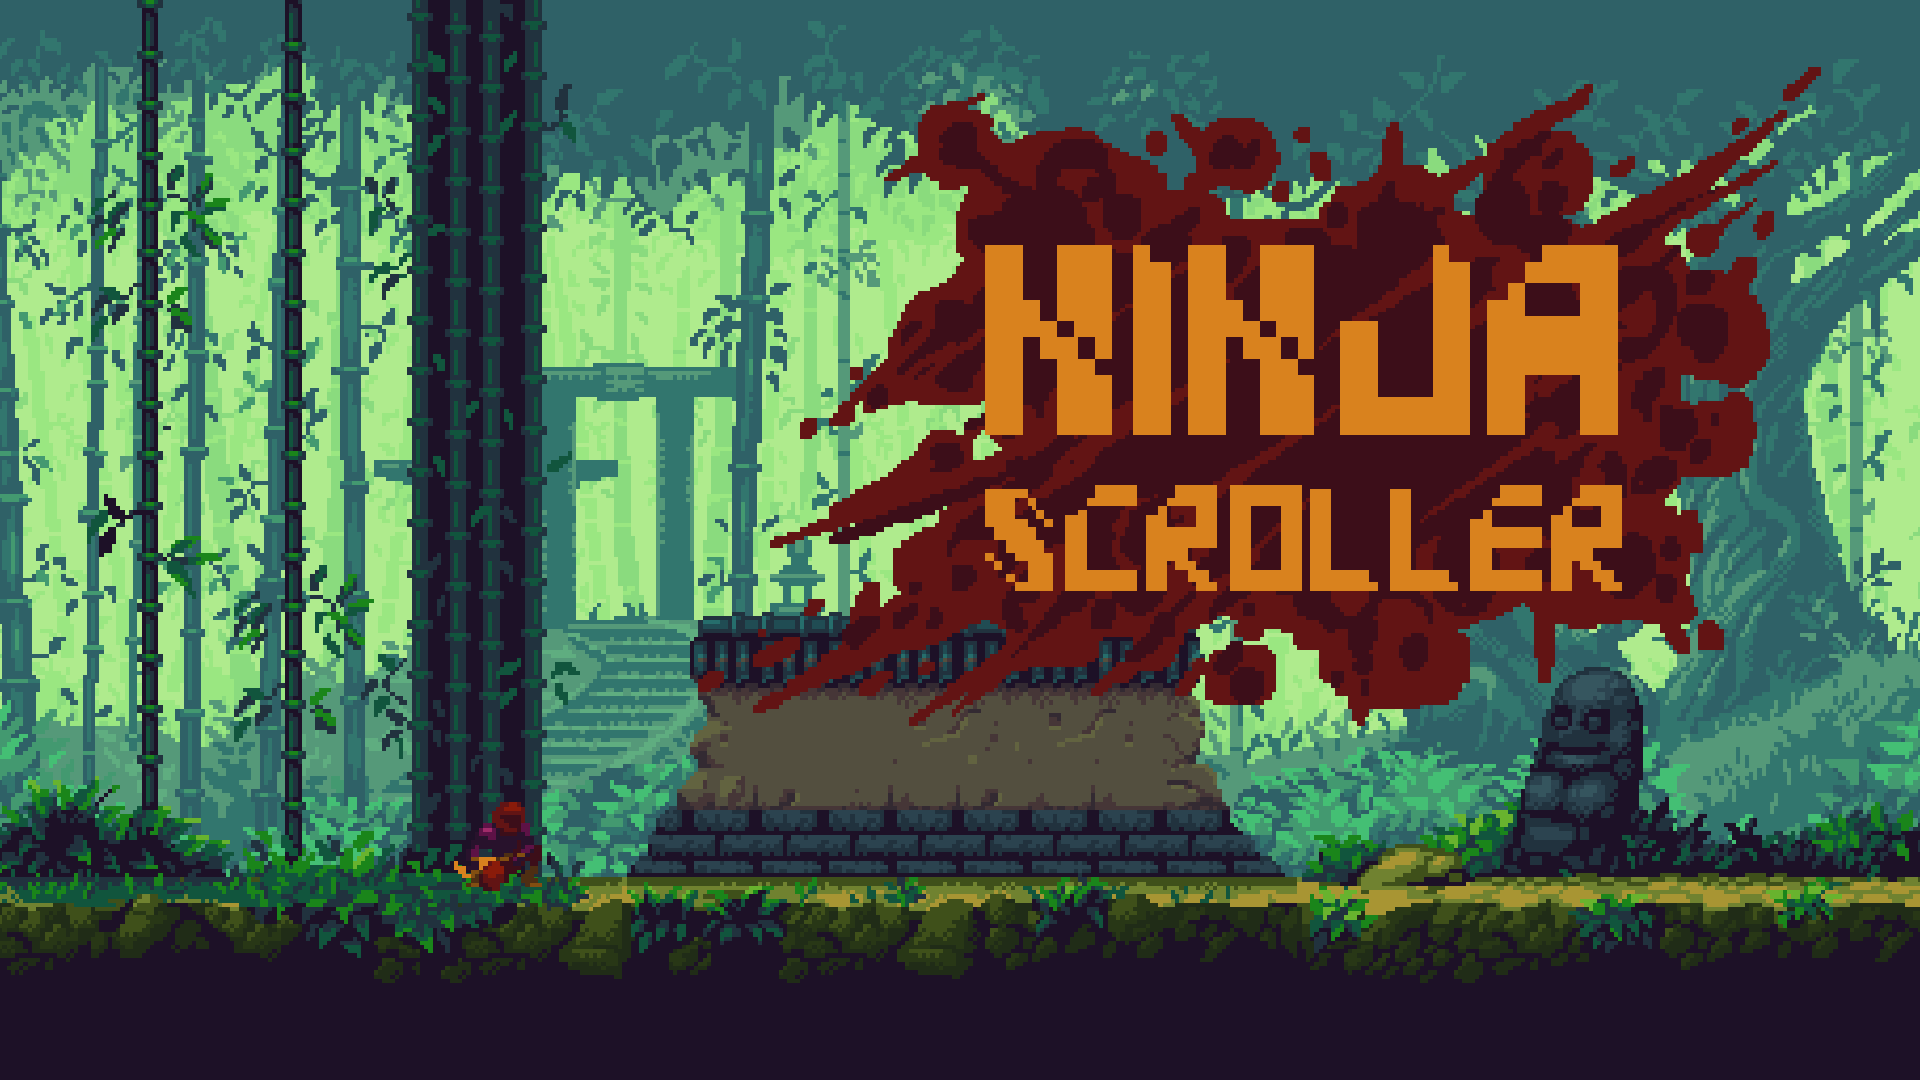 Ninja Scroller is a challenging pixel art runner game with a retrogaming vibe